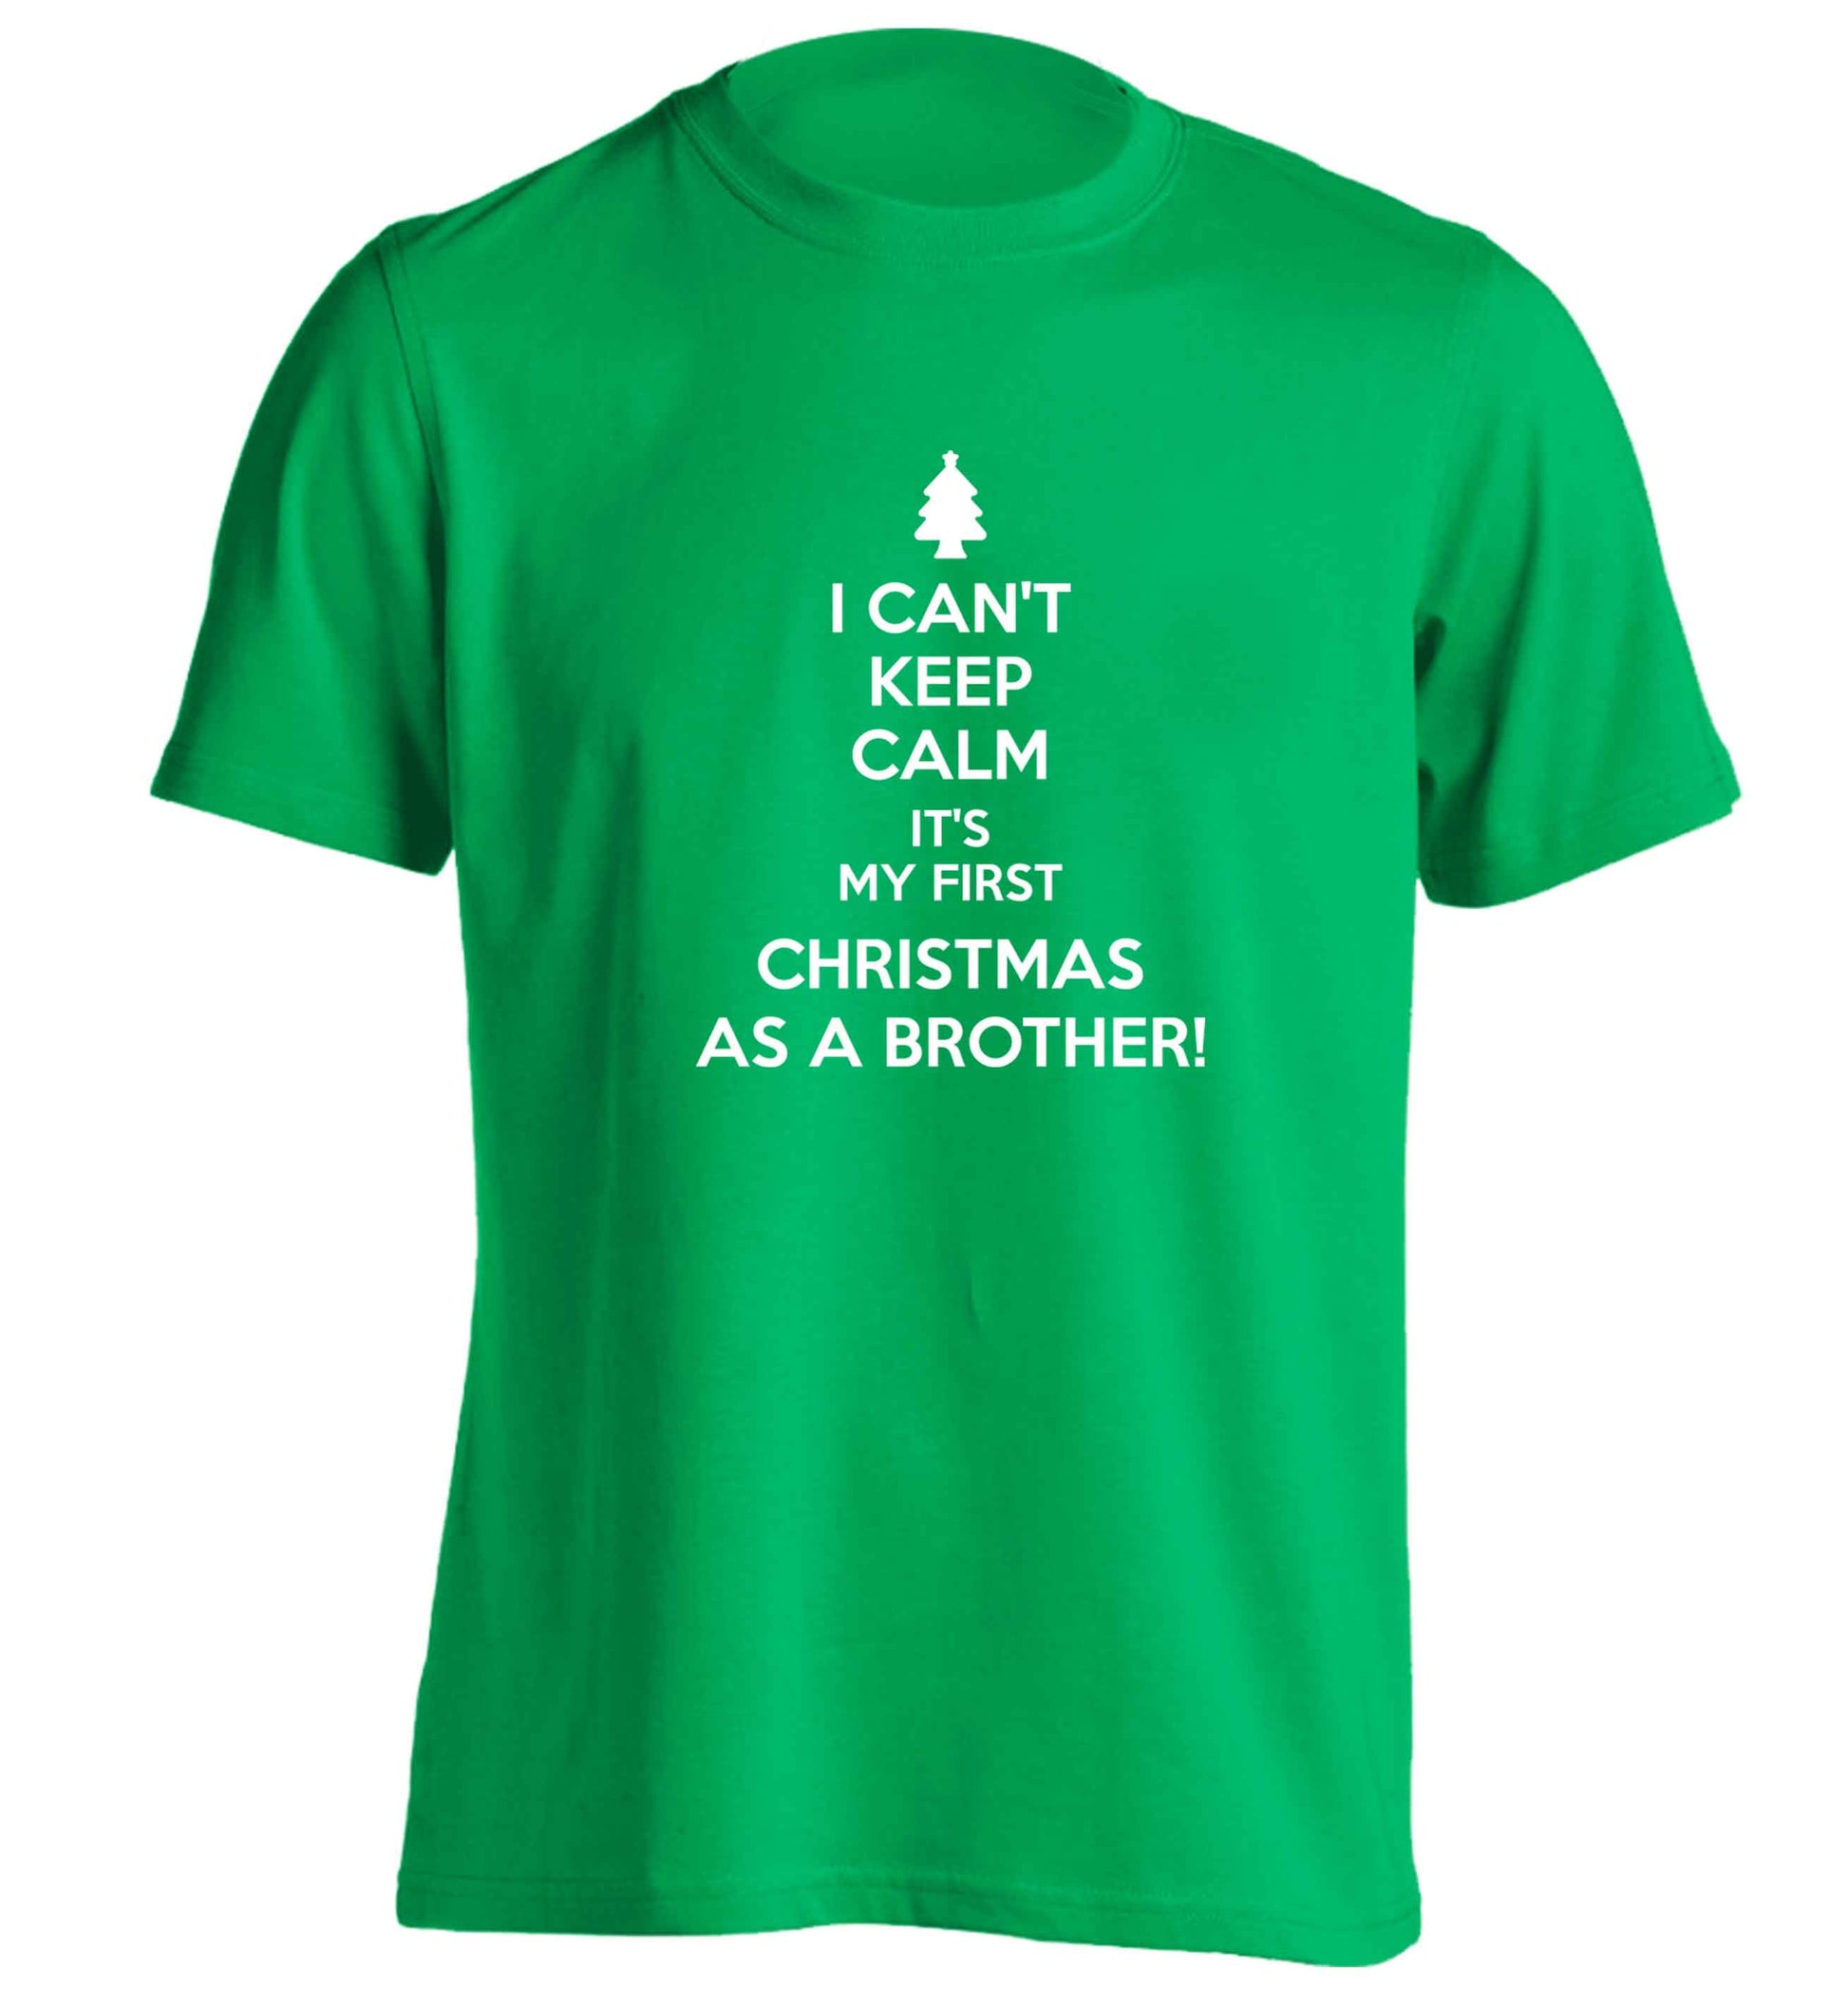 I can't keep calm it's my first Christmas as a brother! adults unisex green Tshirt 2XL